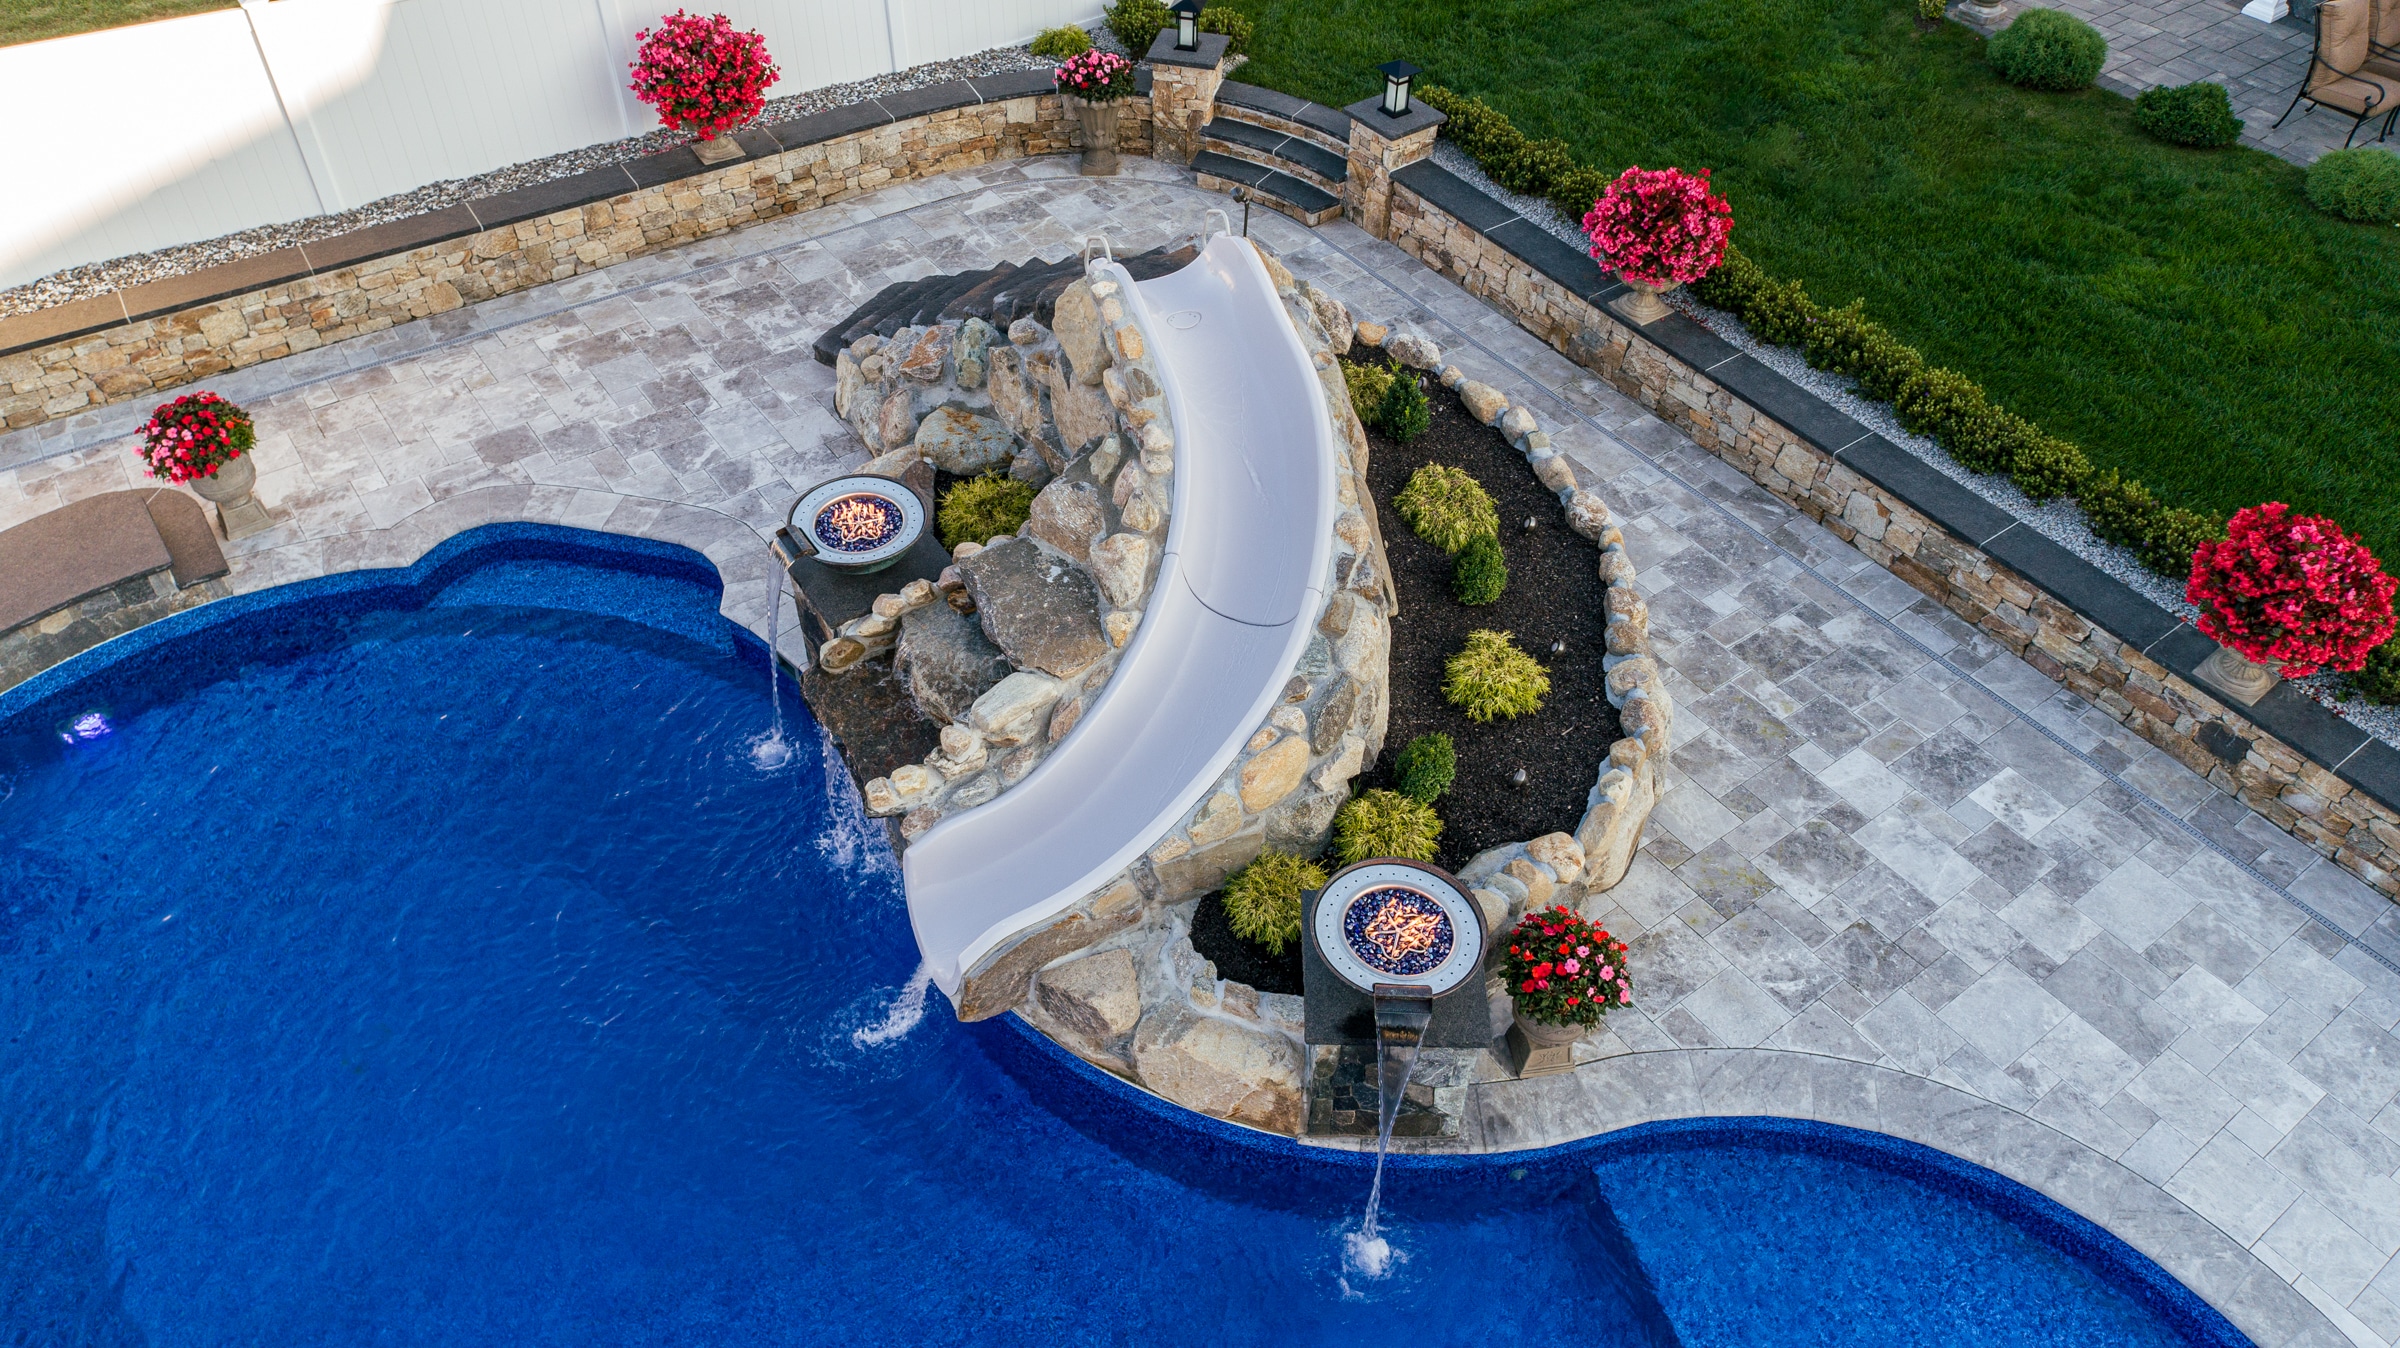 A custom Dex by Terra waterslide with a landscaping bed and water/fire features built with natural stone boulders.